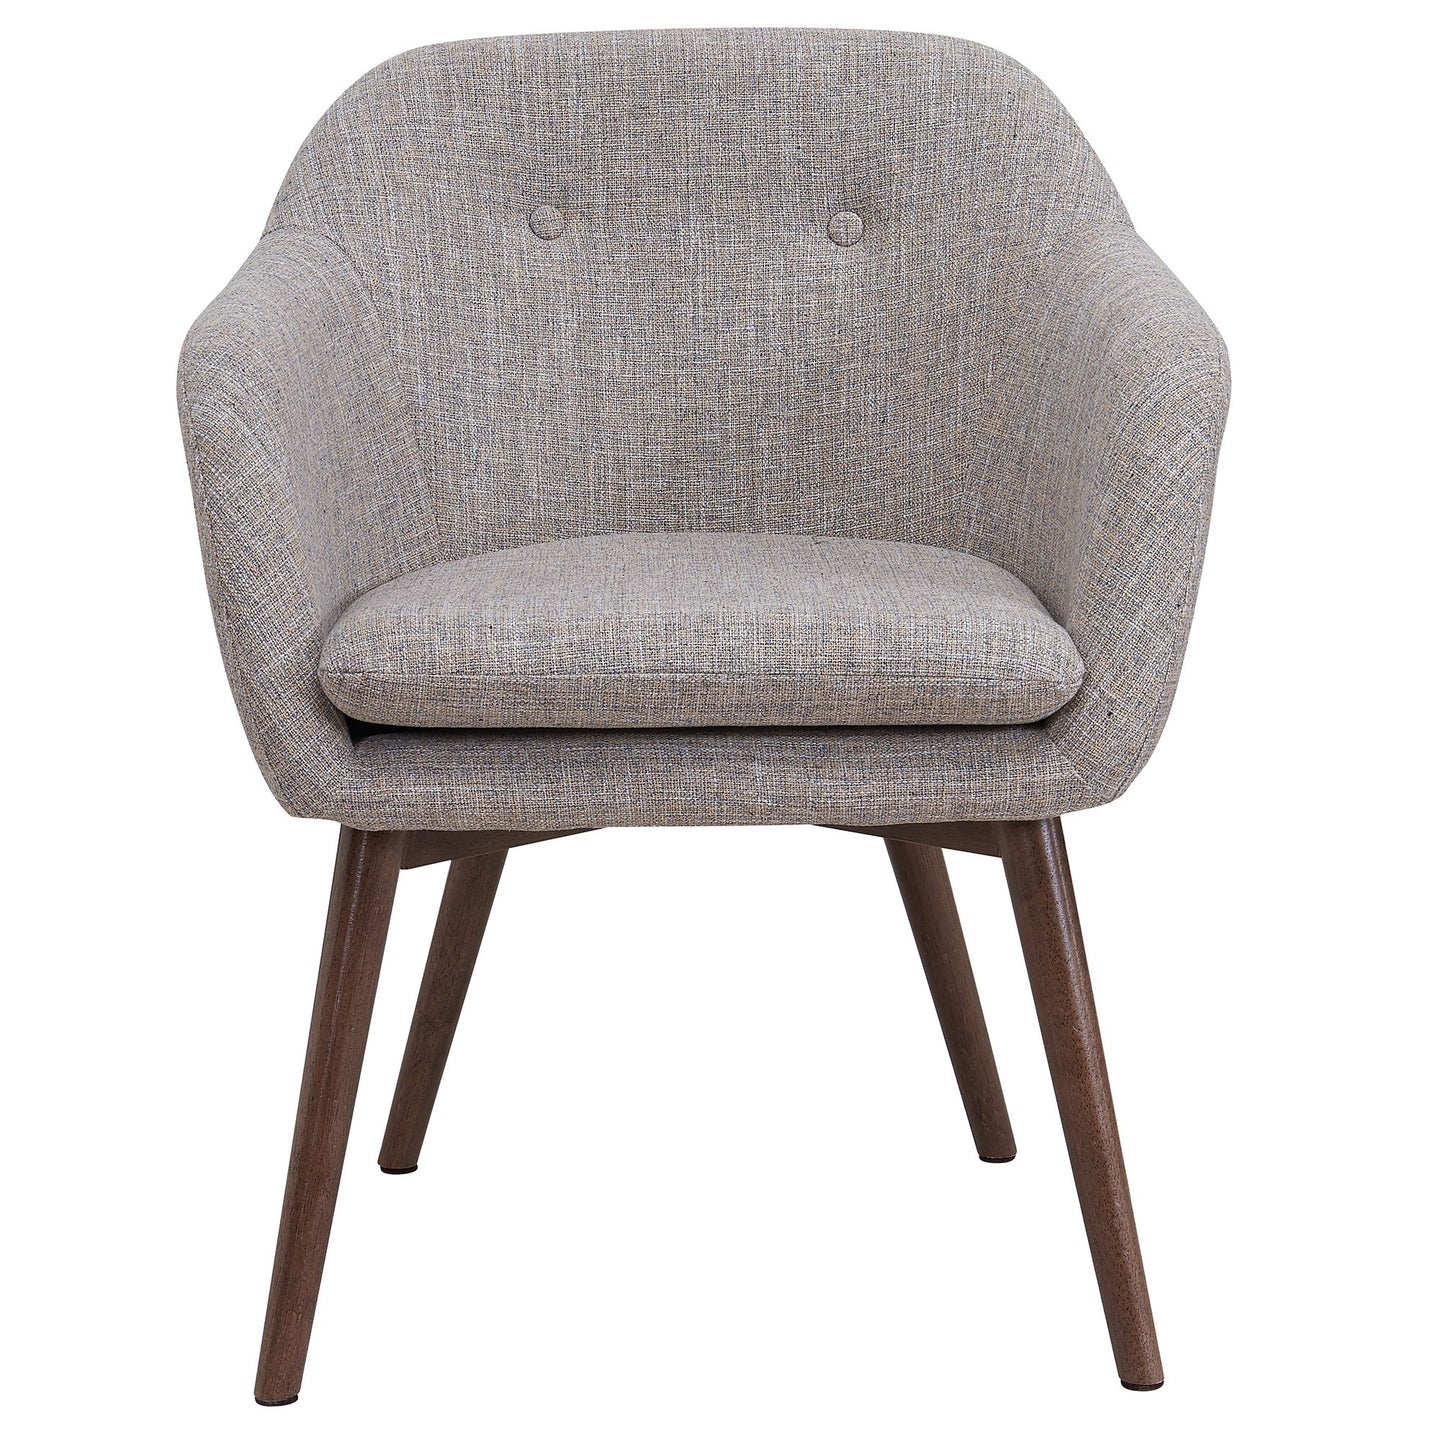 MINTO-ACCENT CHAIR-BEIGE BLEND - ACCENT SEATING